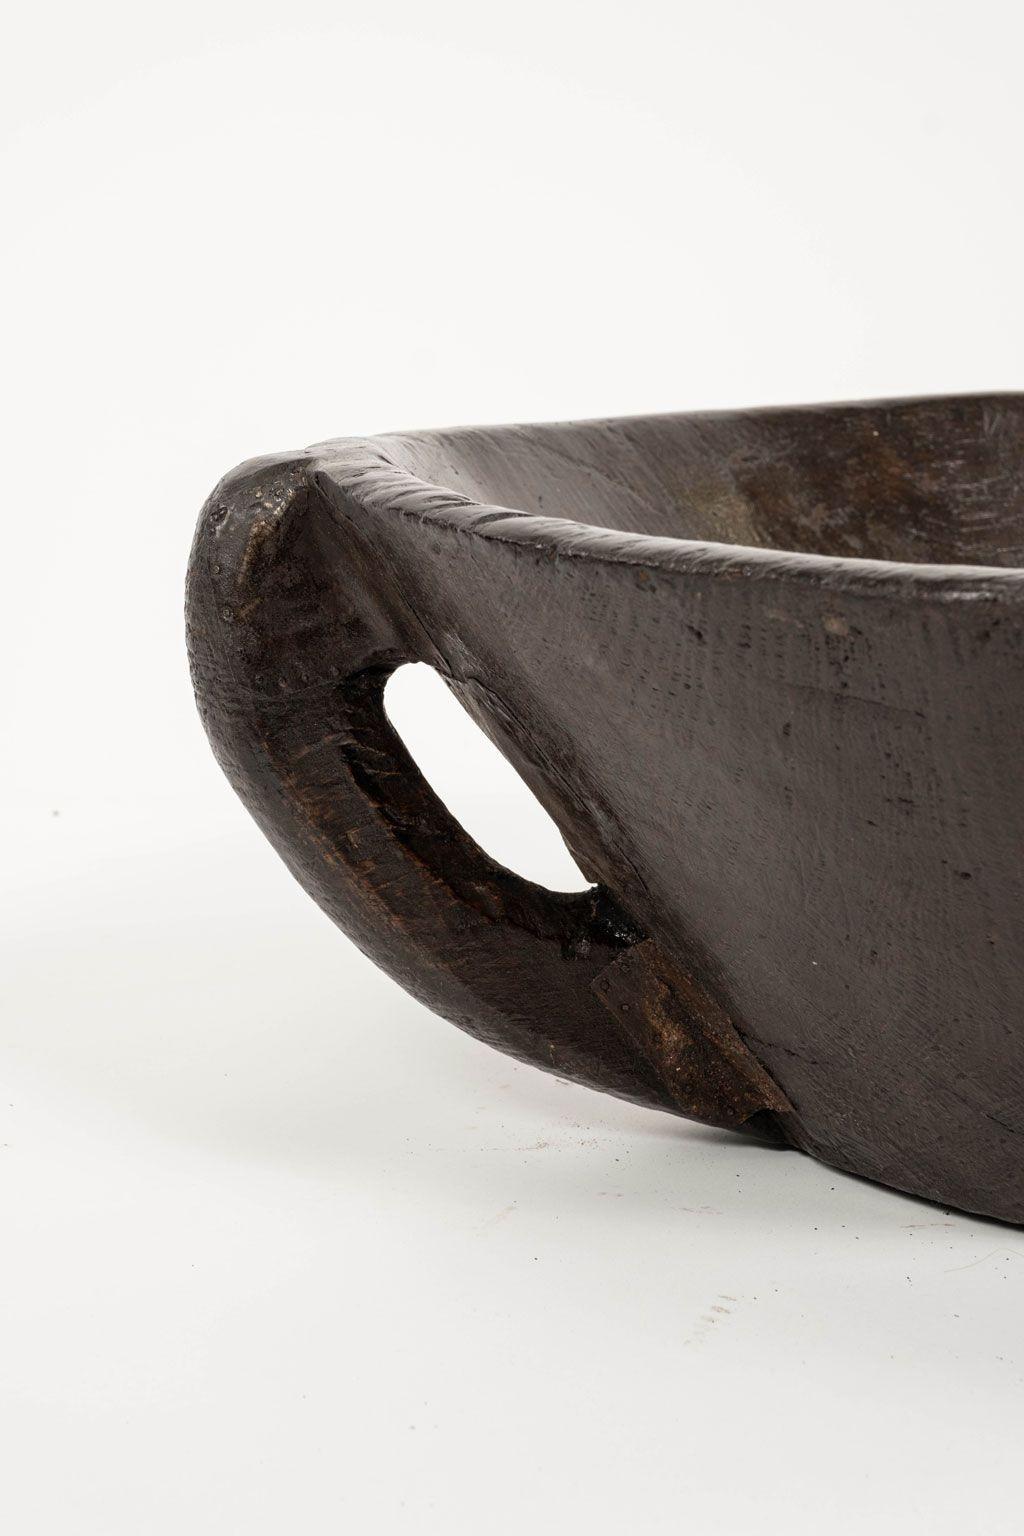 Large primitive bowl hand-carved with handle from hardwood.

Note: Original/early finish on antique and vintage metal will include some, or all, of the following: patina, scaling, light rust, discoloration, and corrosion. Due to regional changes in